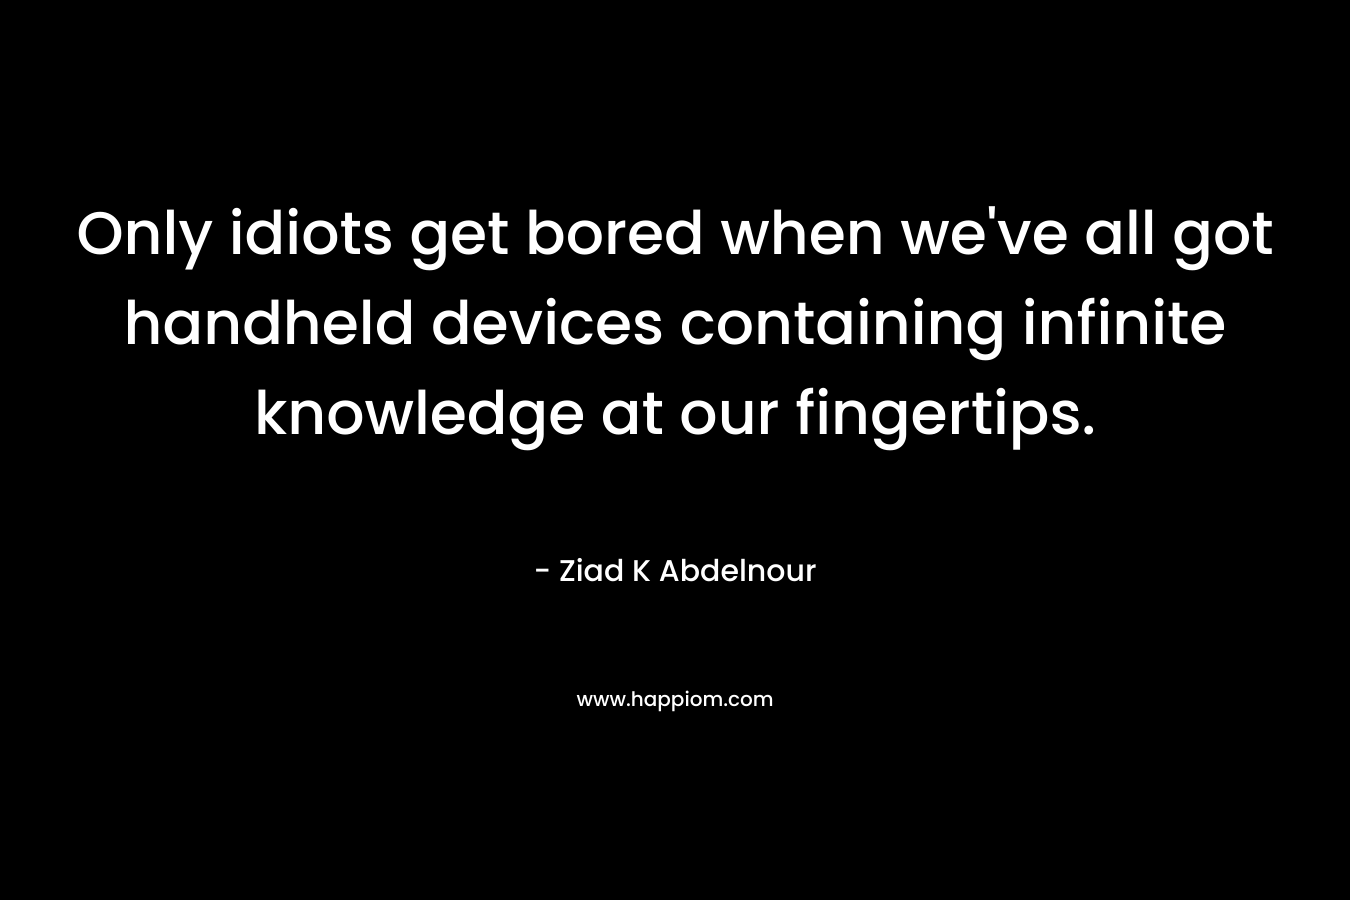 Only idiots get bored when we've all got handheld devices containing infinite knowledge at our fingertips.